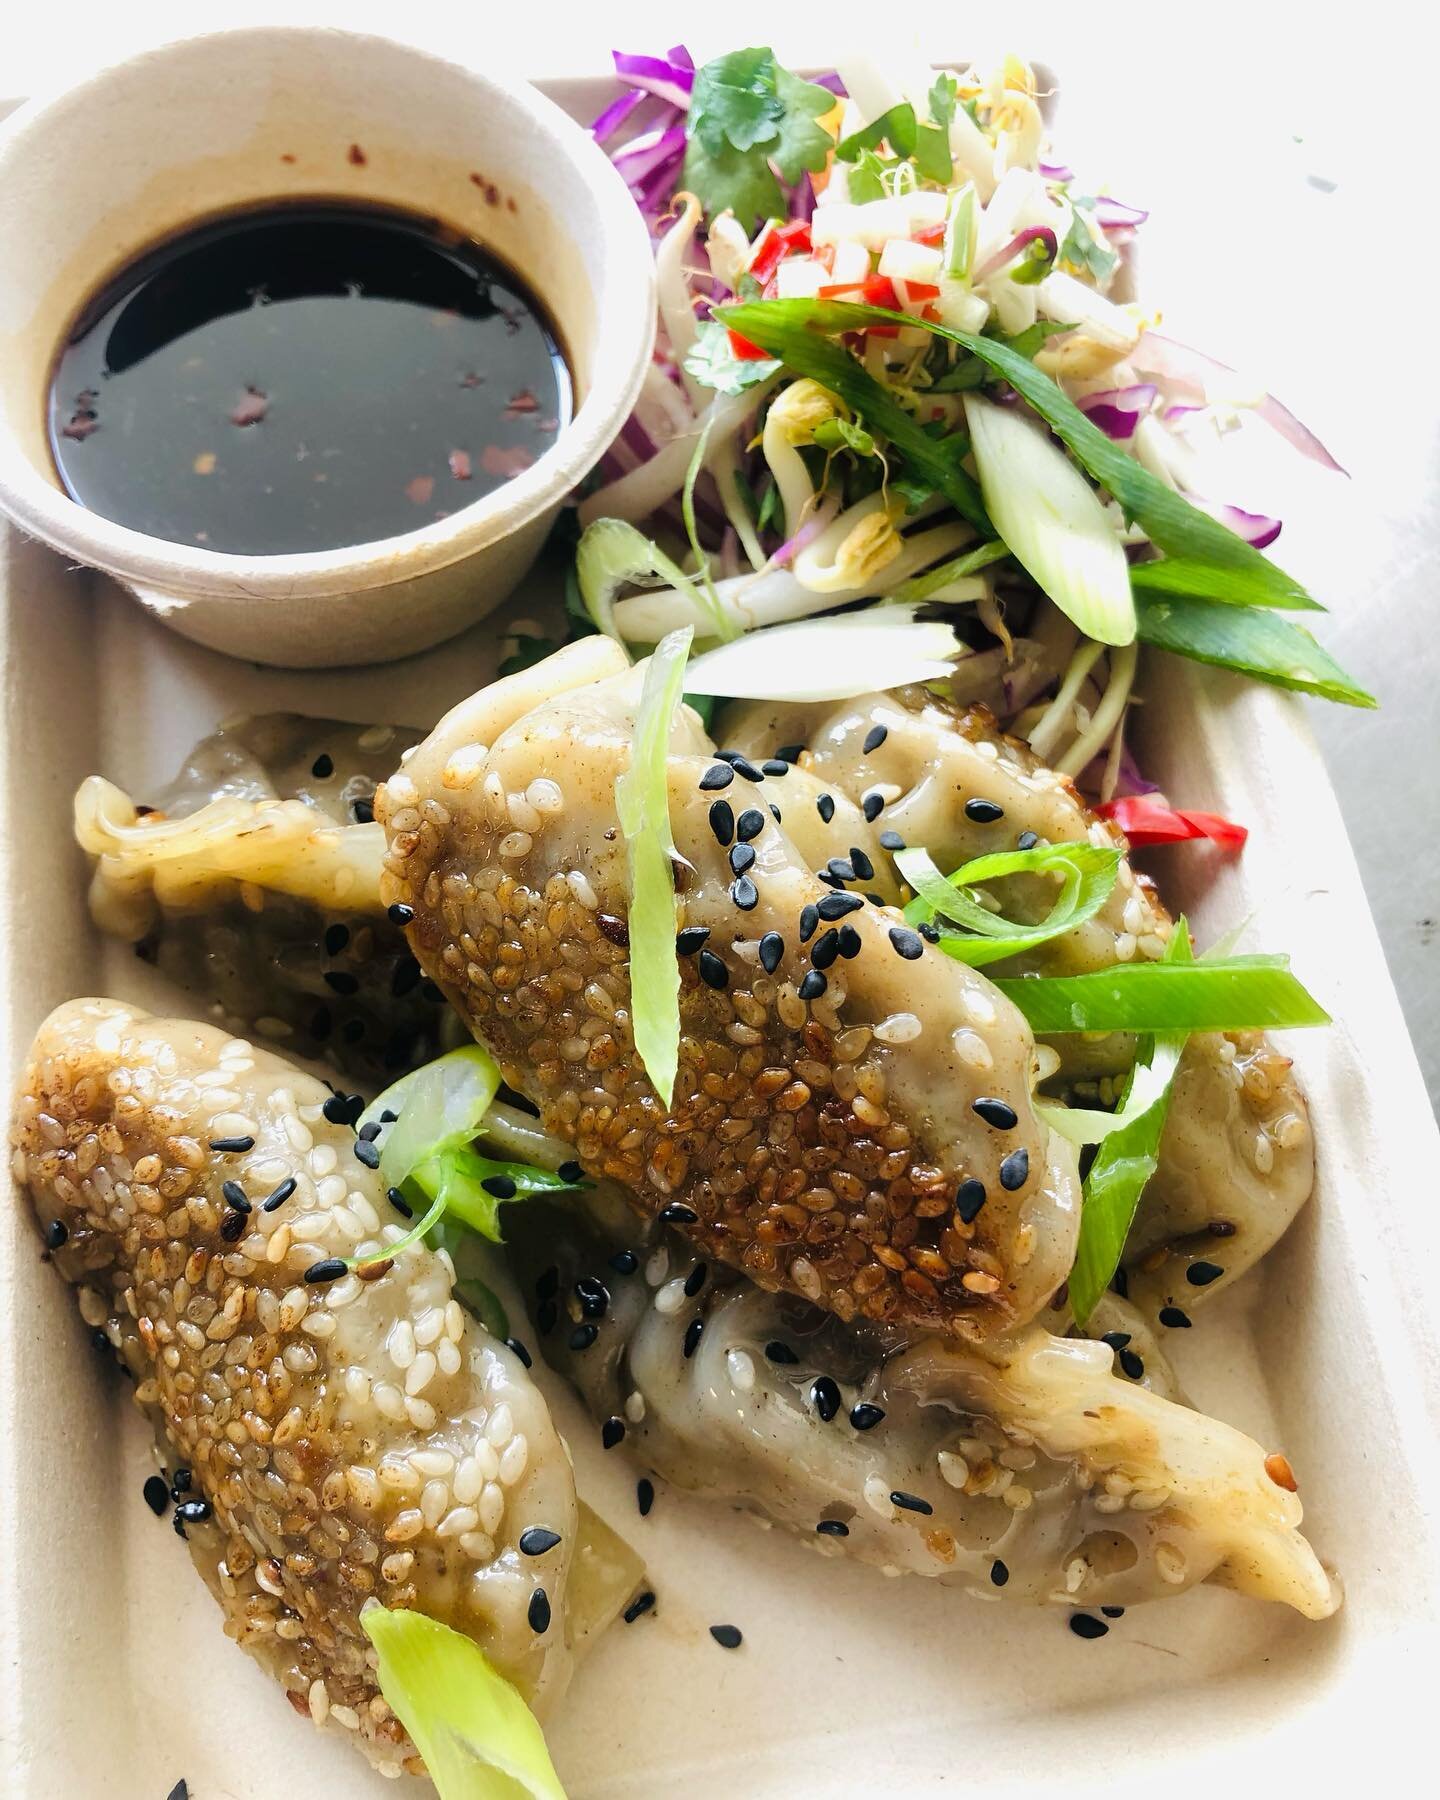 Do you know the best way to refuel after a hard days skiing?! &hellip;delicious dumplings of course!! 
These are our sesame crusted shiitake gyozas&hellip;not only are they yum, they are even vegan!  Served with Asian slaw and a ponzu dipping sauce.
